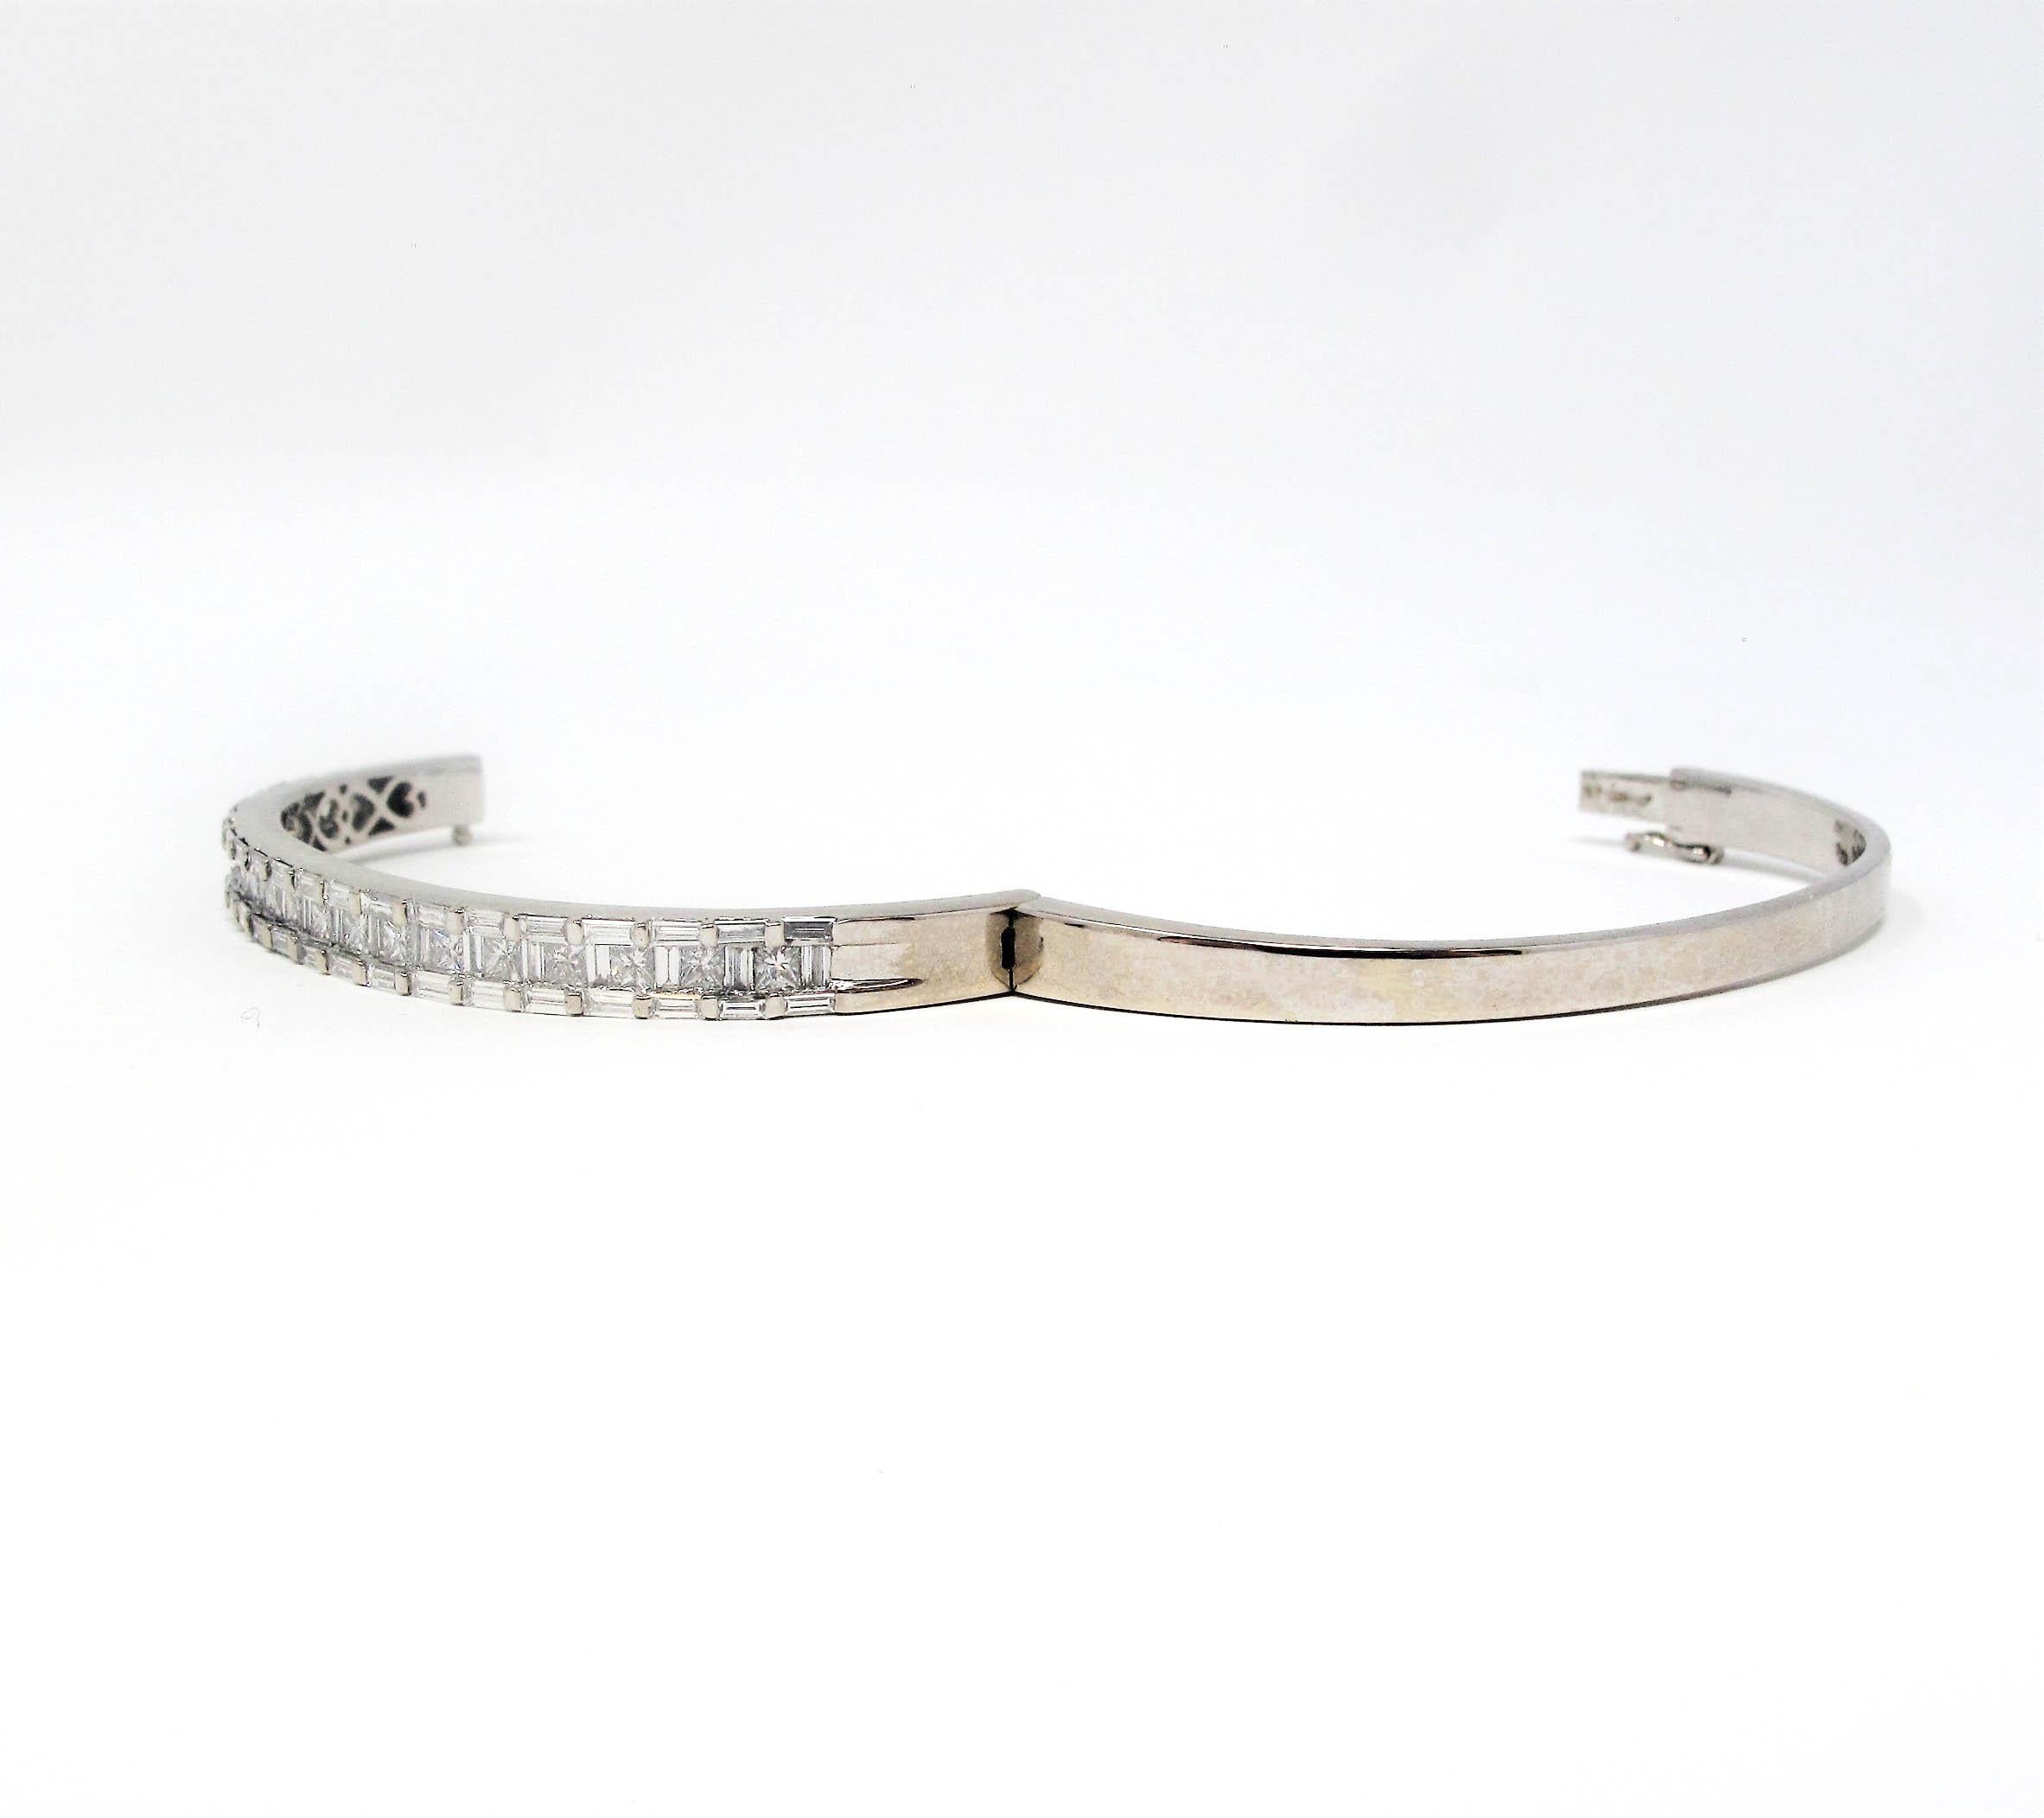 Baguette and Princess Cut Diamond Hinged Oval Bangle Bracelet in 18 Karat Gold In Good Condition For Sale In Scottsdale, AZ